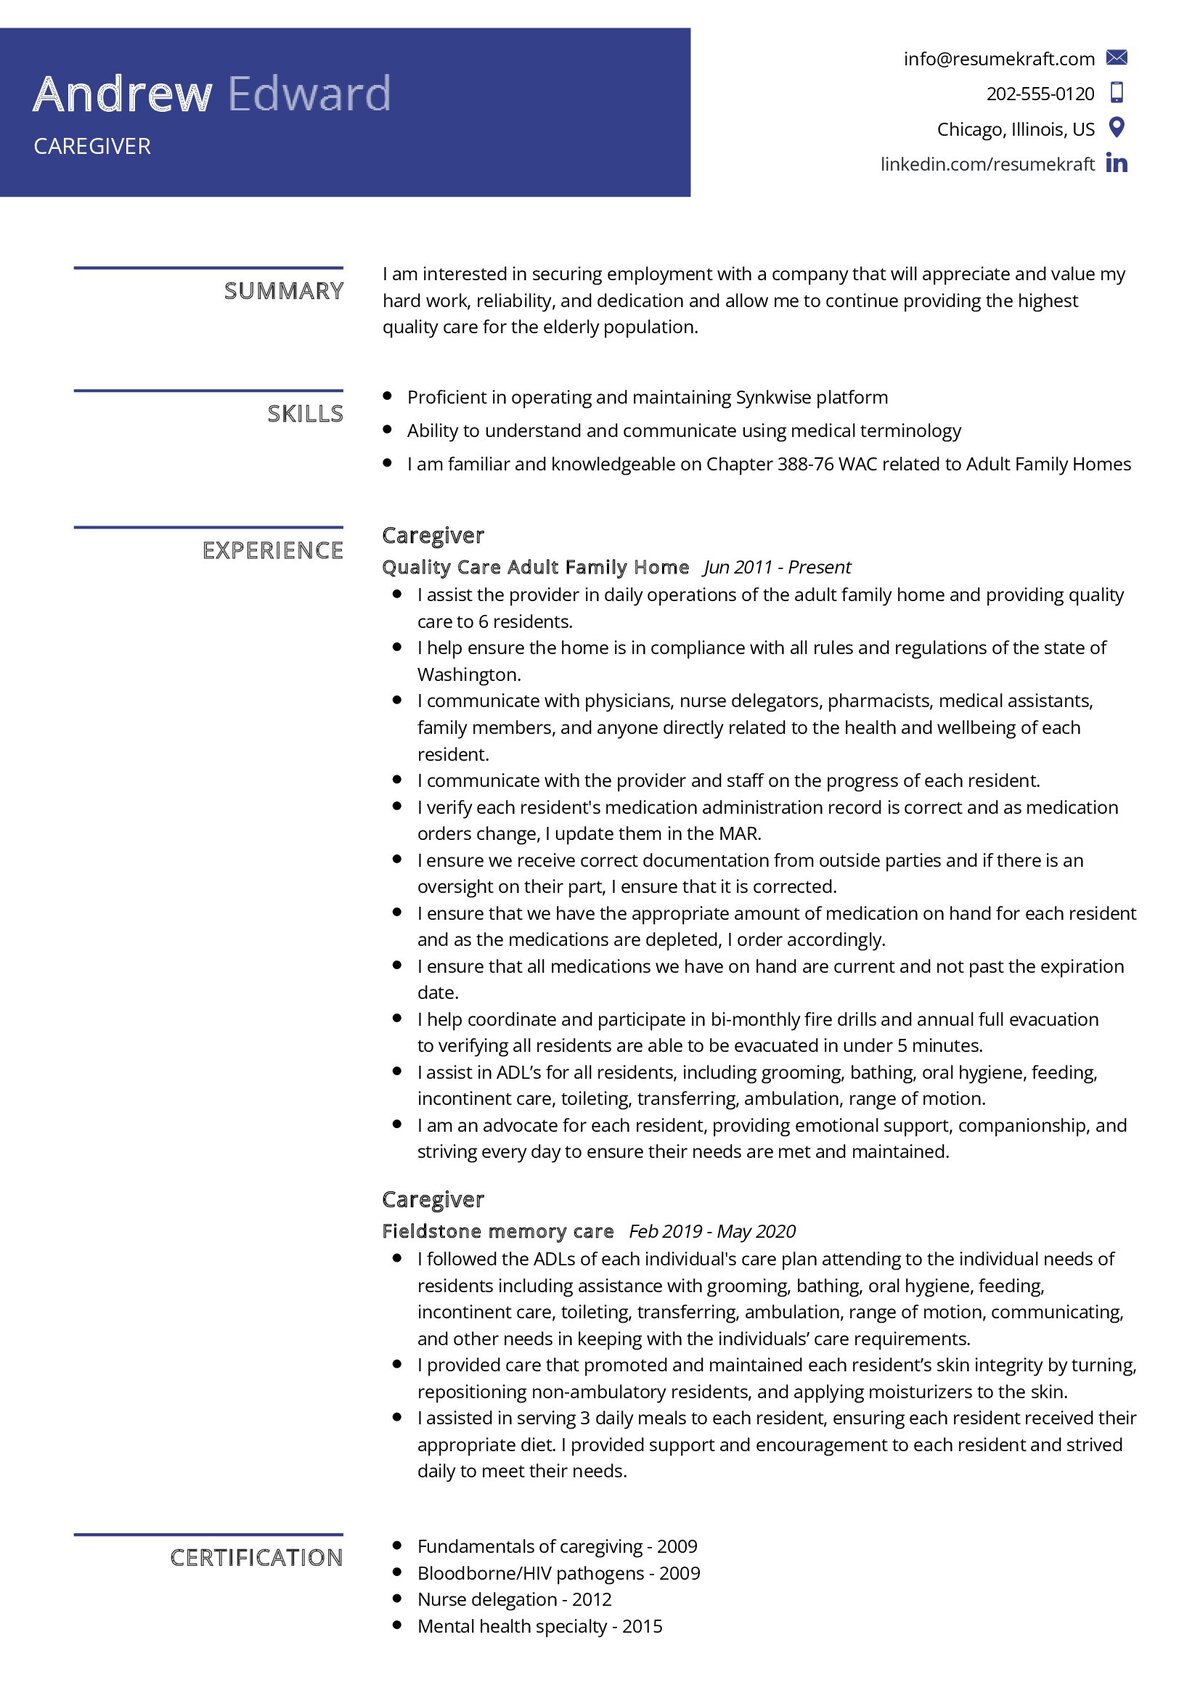 what is a good summary for resume for caregiver